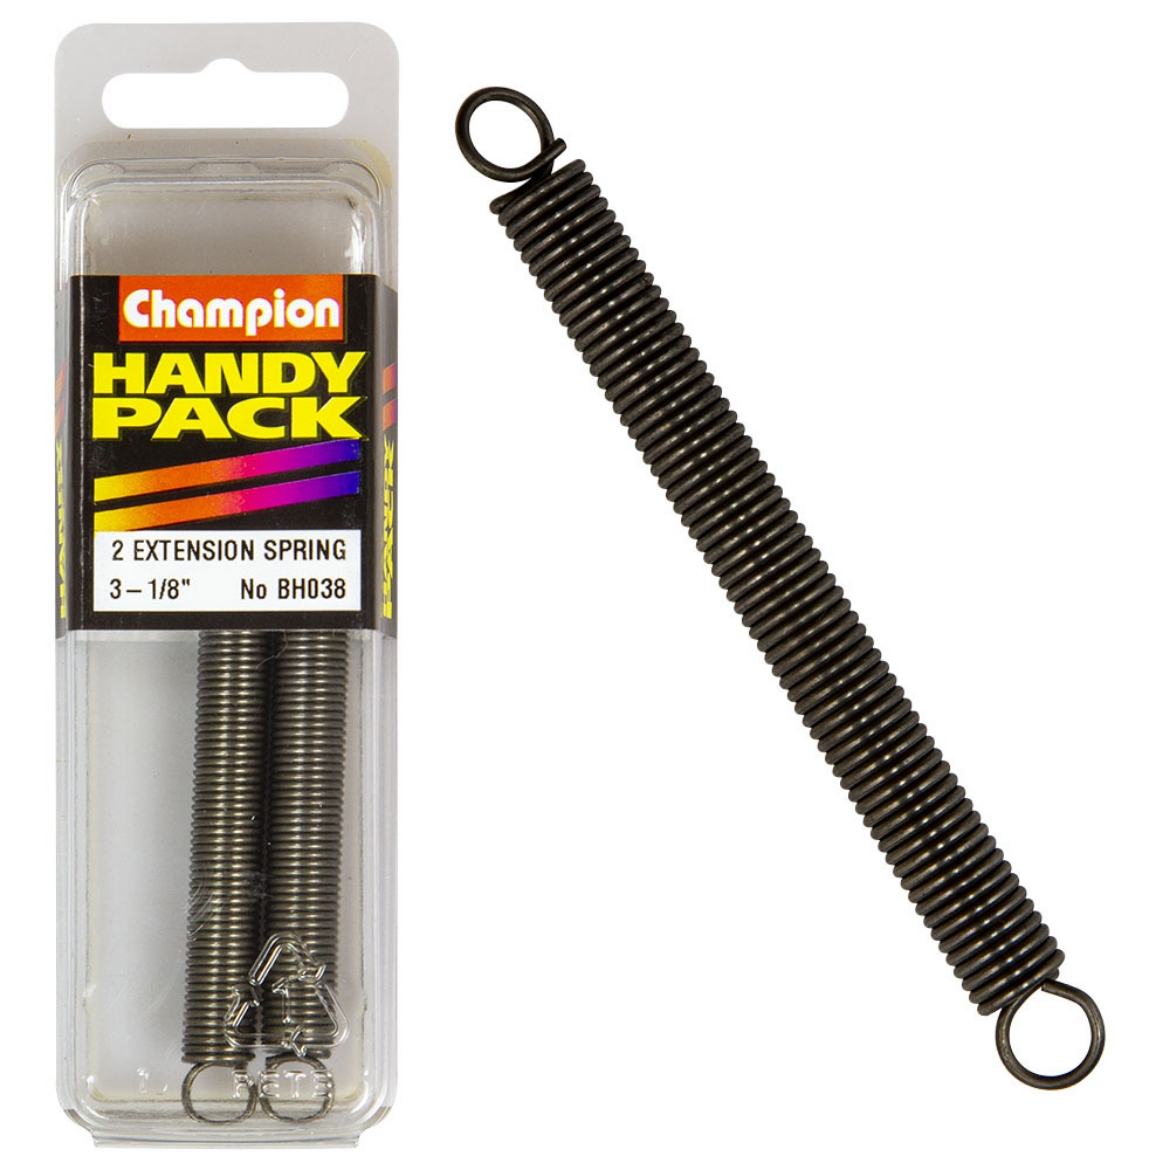 Picture of Handy Pk Extension Spring 3-1/8x11/32x20g CES (Pkt.2)